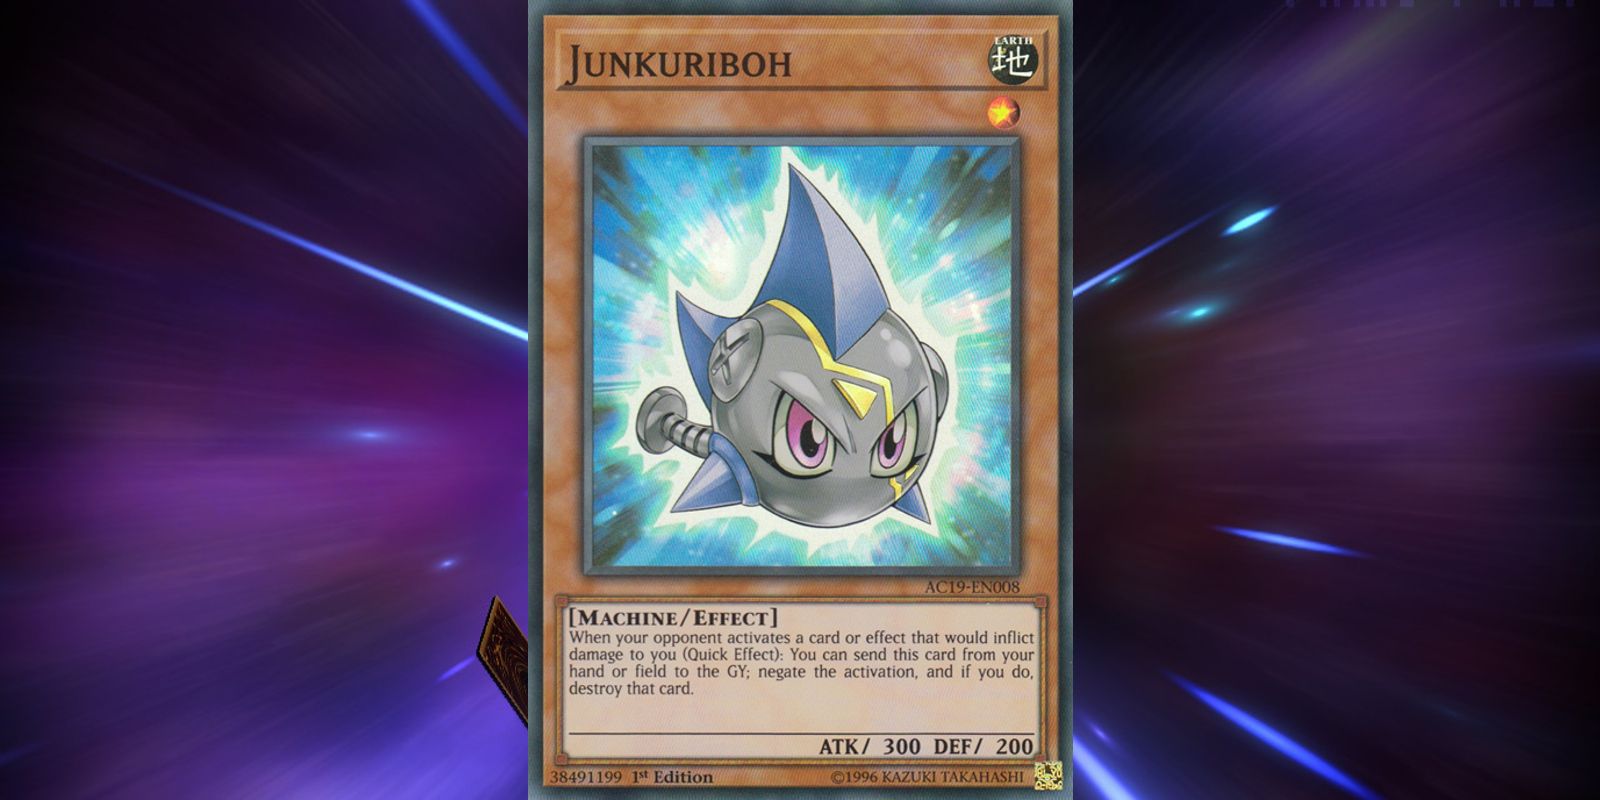 Junkuriboh is a destructive hand trap in Yu-Gi-Oh! Master Duel.